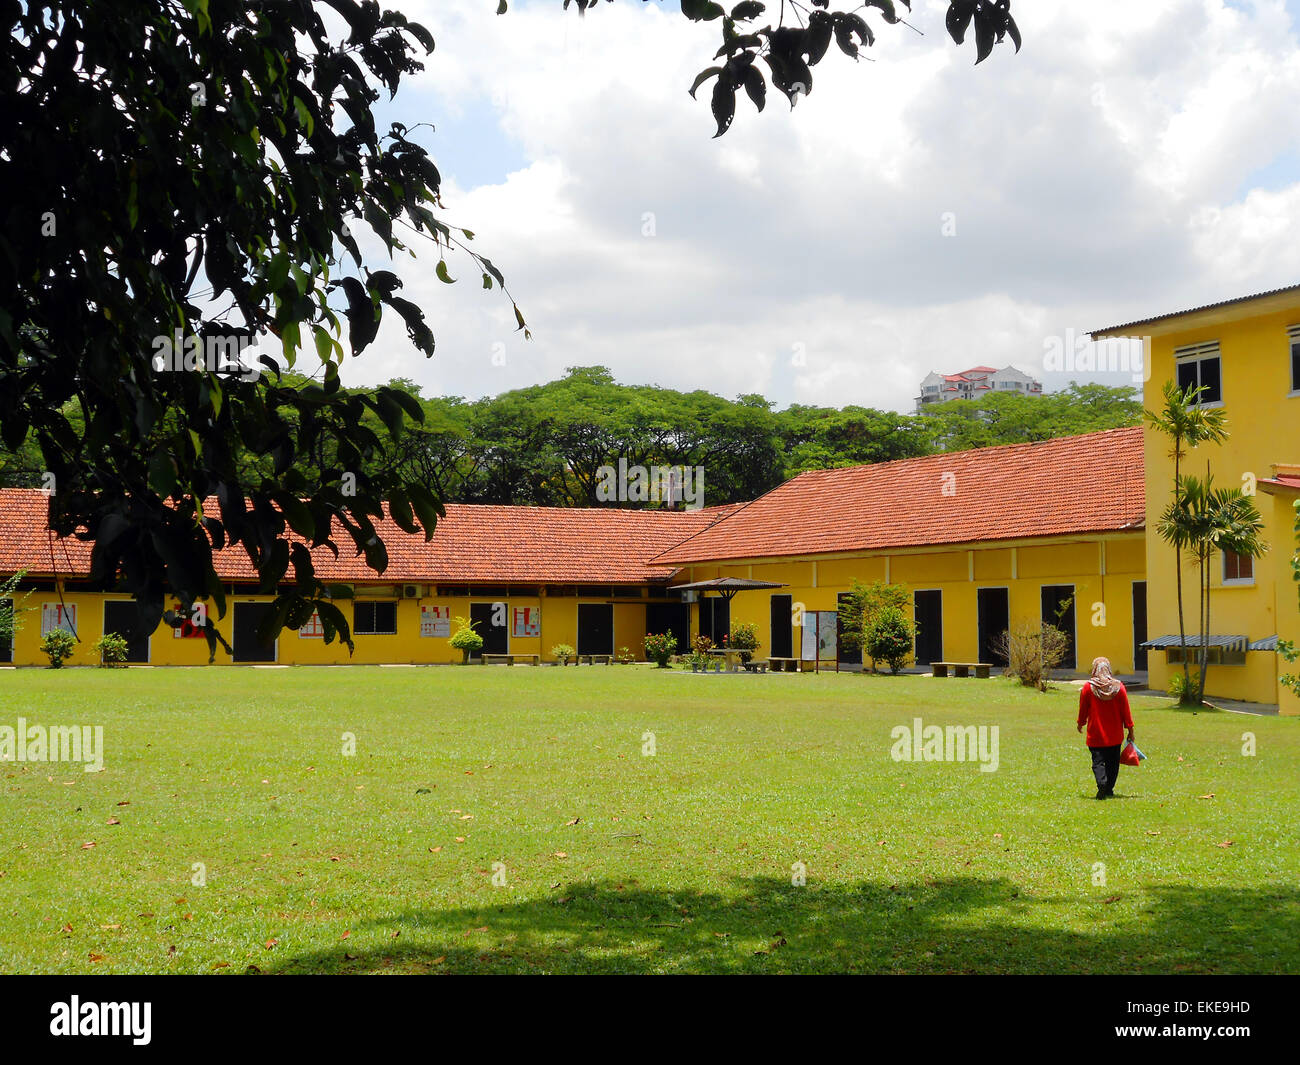 Colorful Schoolyard in Malaysia with a woman walking across the yard Stock Photo